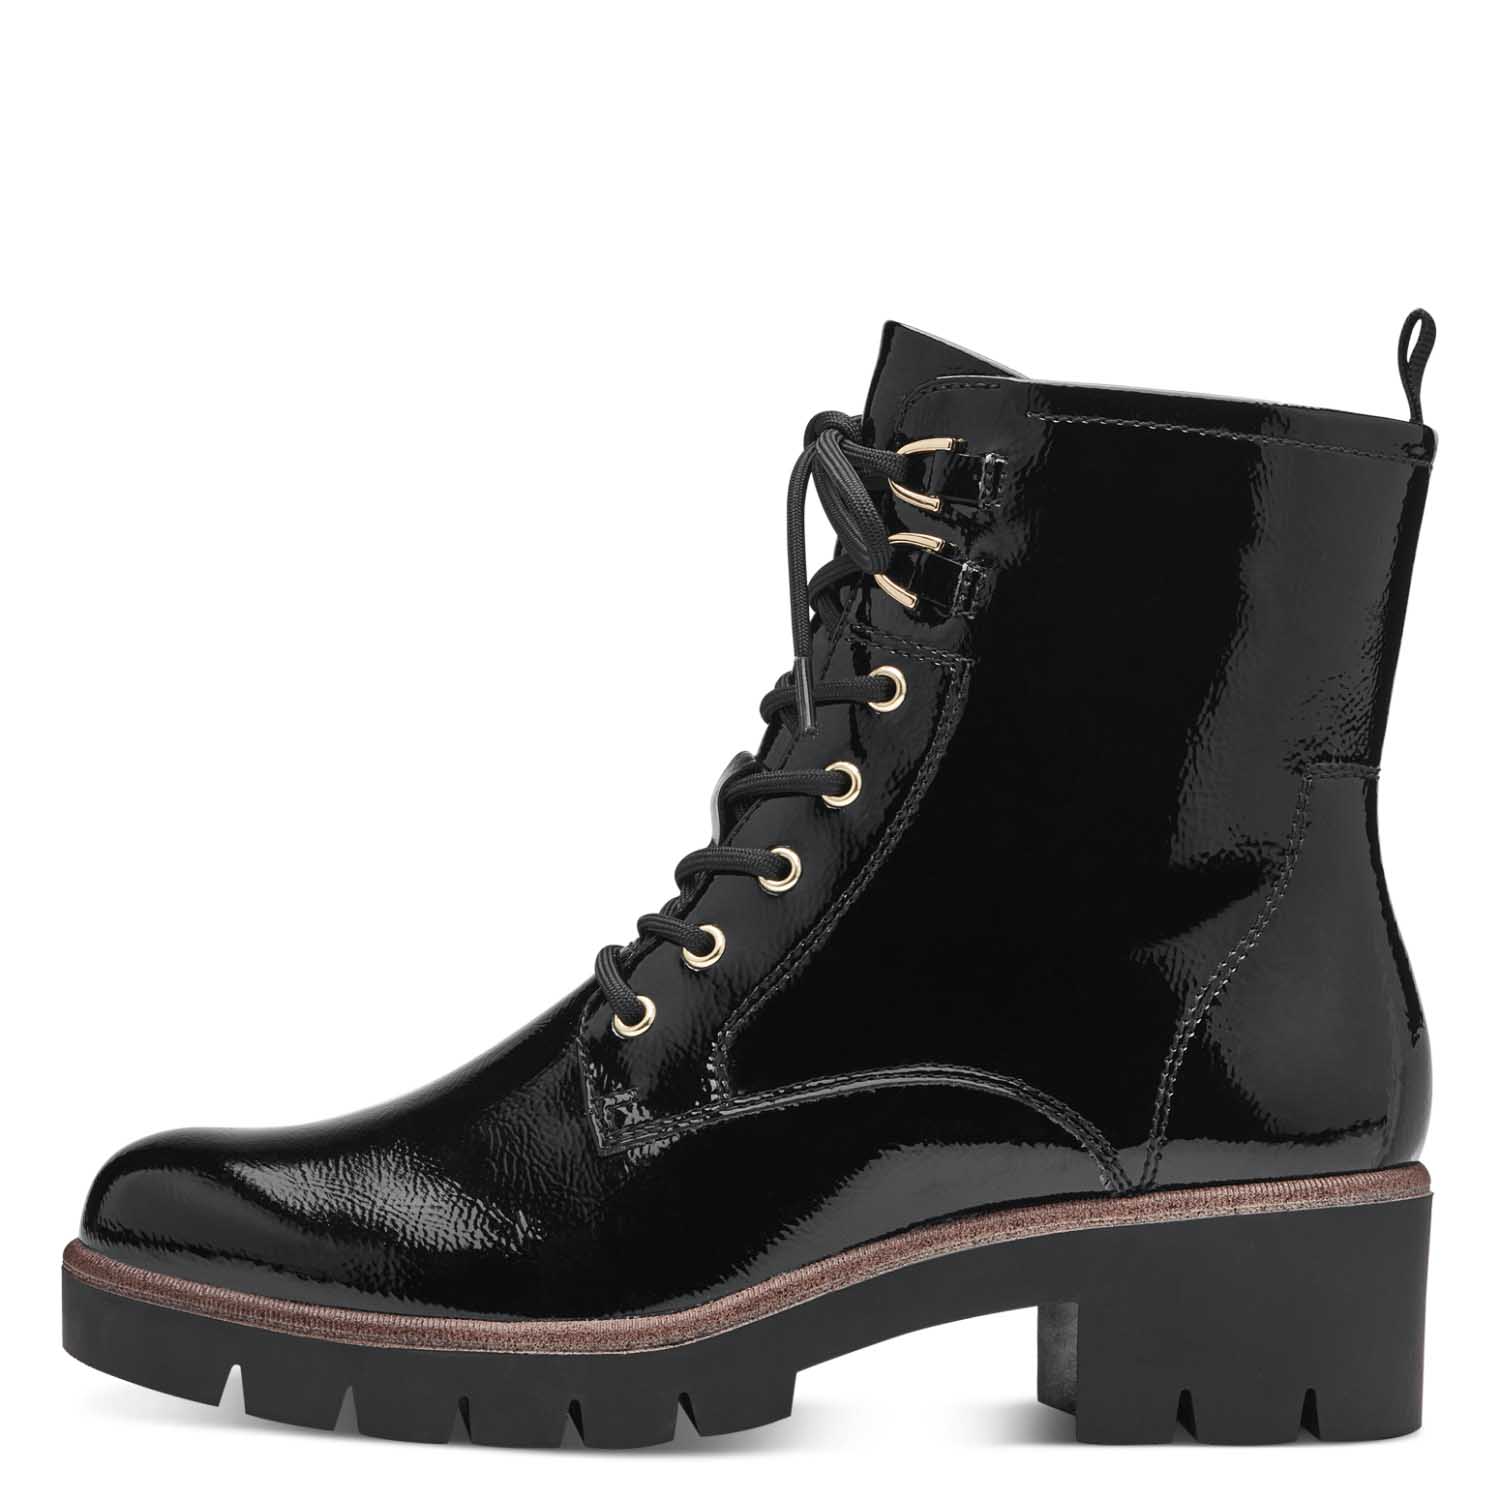 Front view of the black patent ankle boots.